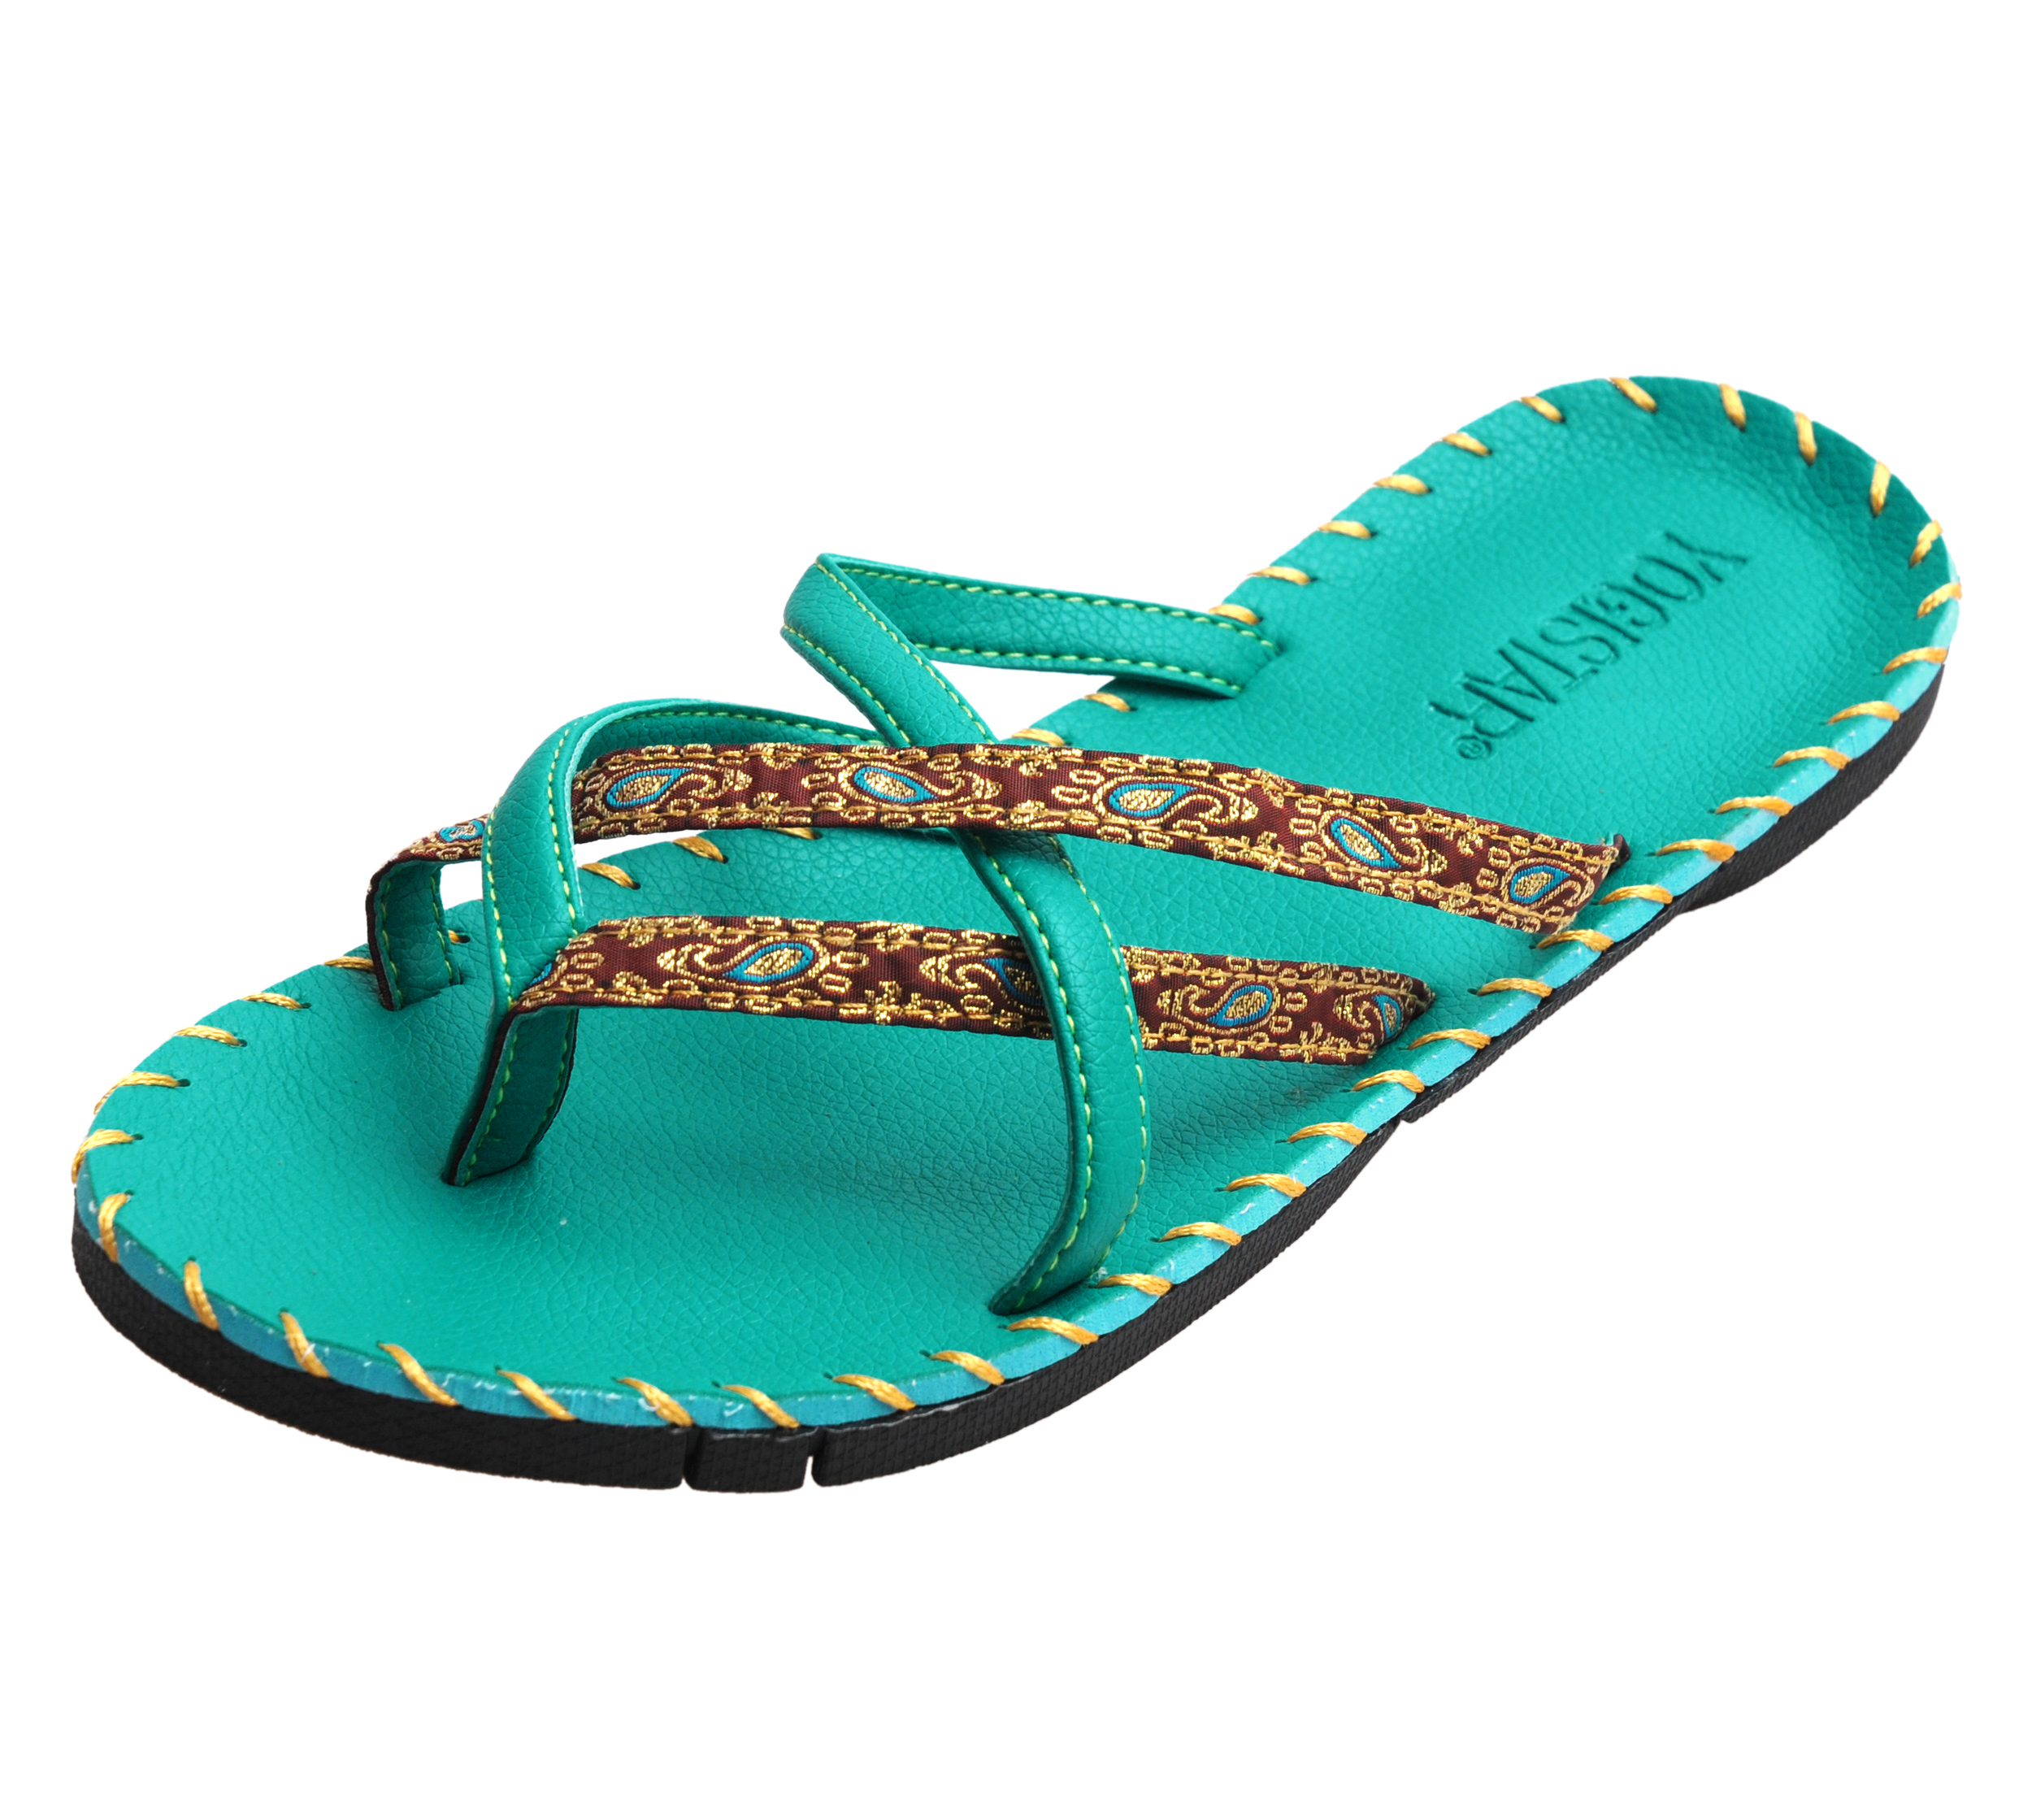 https://www.yogistar.com/out/pictures/master/product/1/yoga_sandalen_turquoise_seitenansicht_links_web2500.jpg